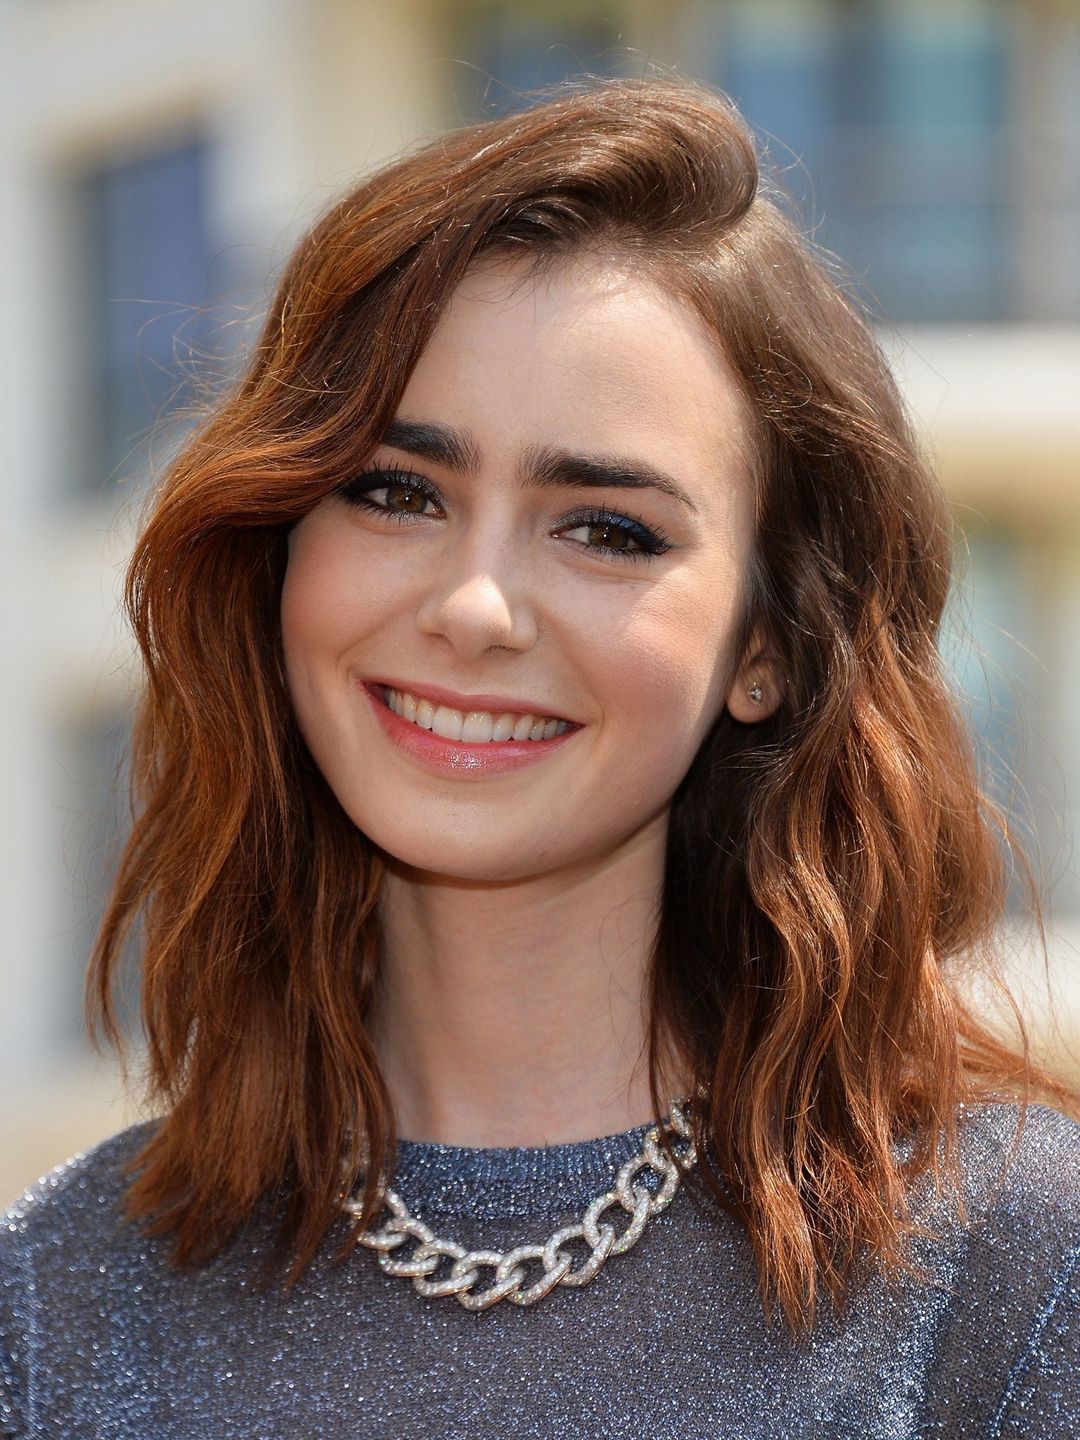 Lily Collins story of success